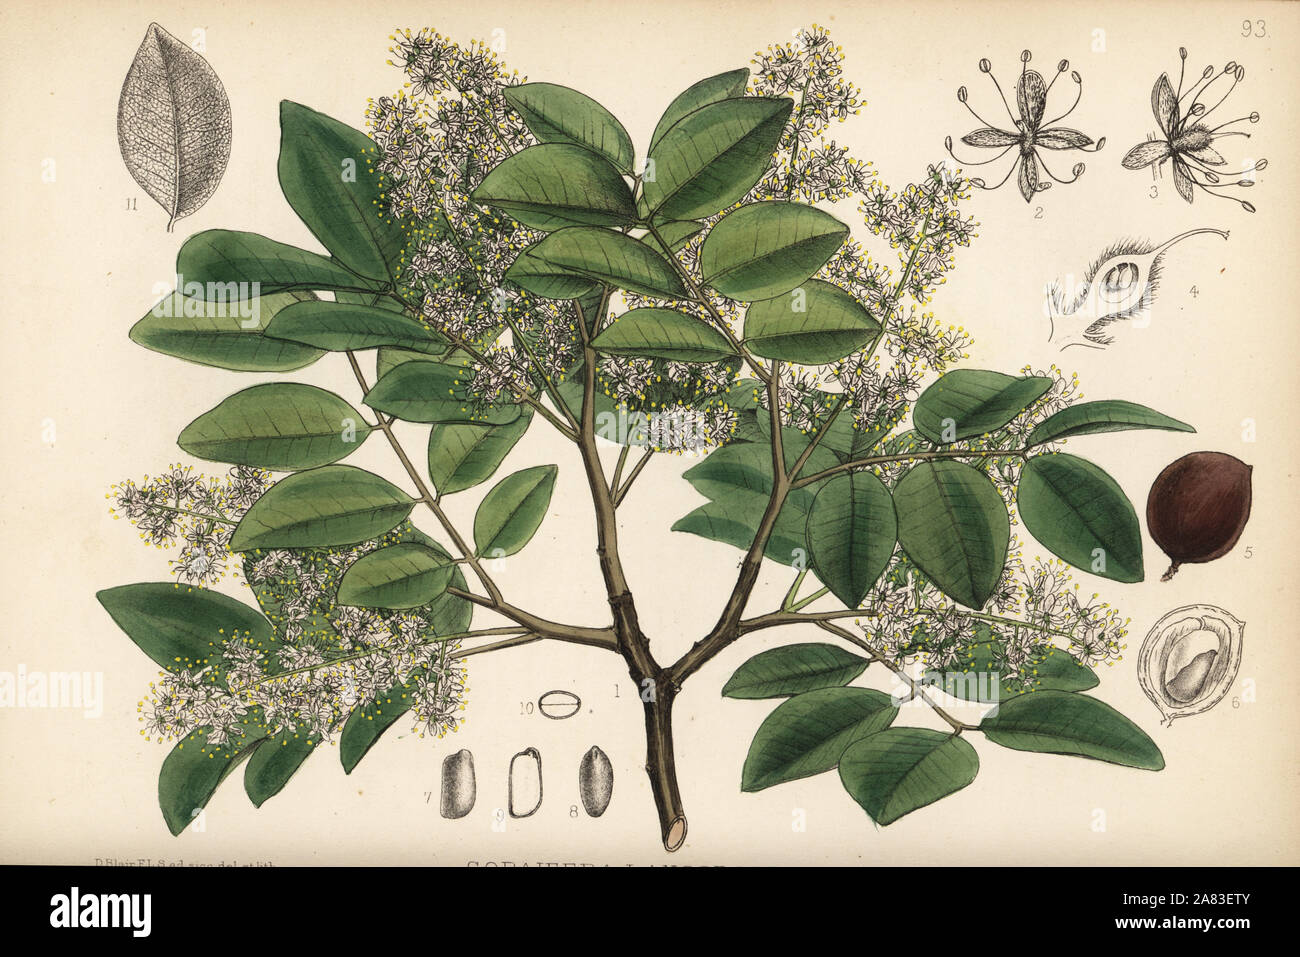 Copaiba, rashed tree or salam tree, Copaifera langsdorffii. Handcoloured lithograph by Hanhart after a botanical illustration by David Blair from Robert Bentley and Henry Trimen's Medicinal Plants, London, 1880. Stock Photo